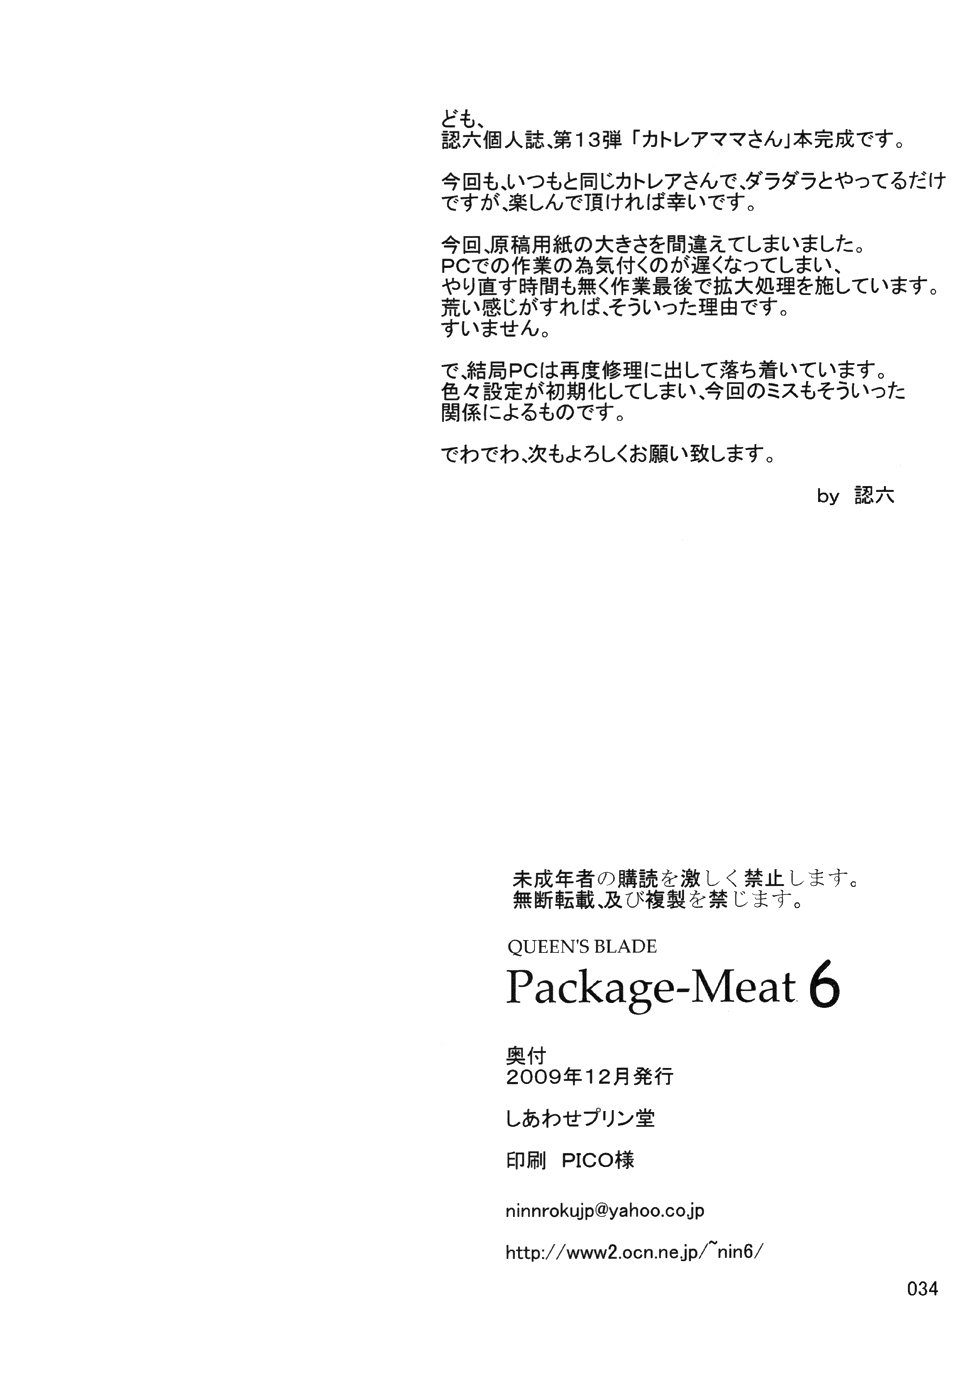 PACKAGE MEAT 6 - 31